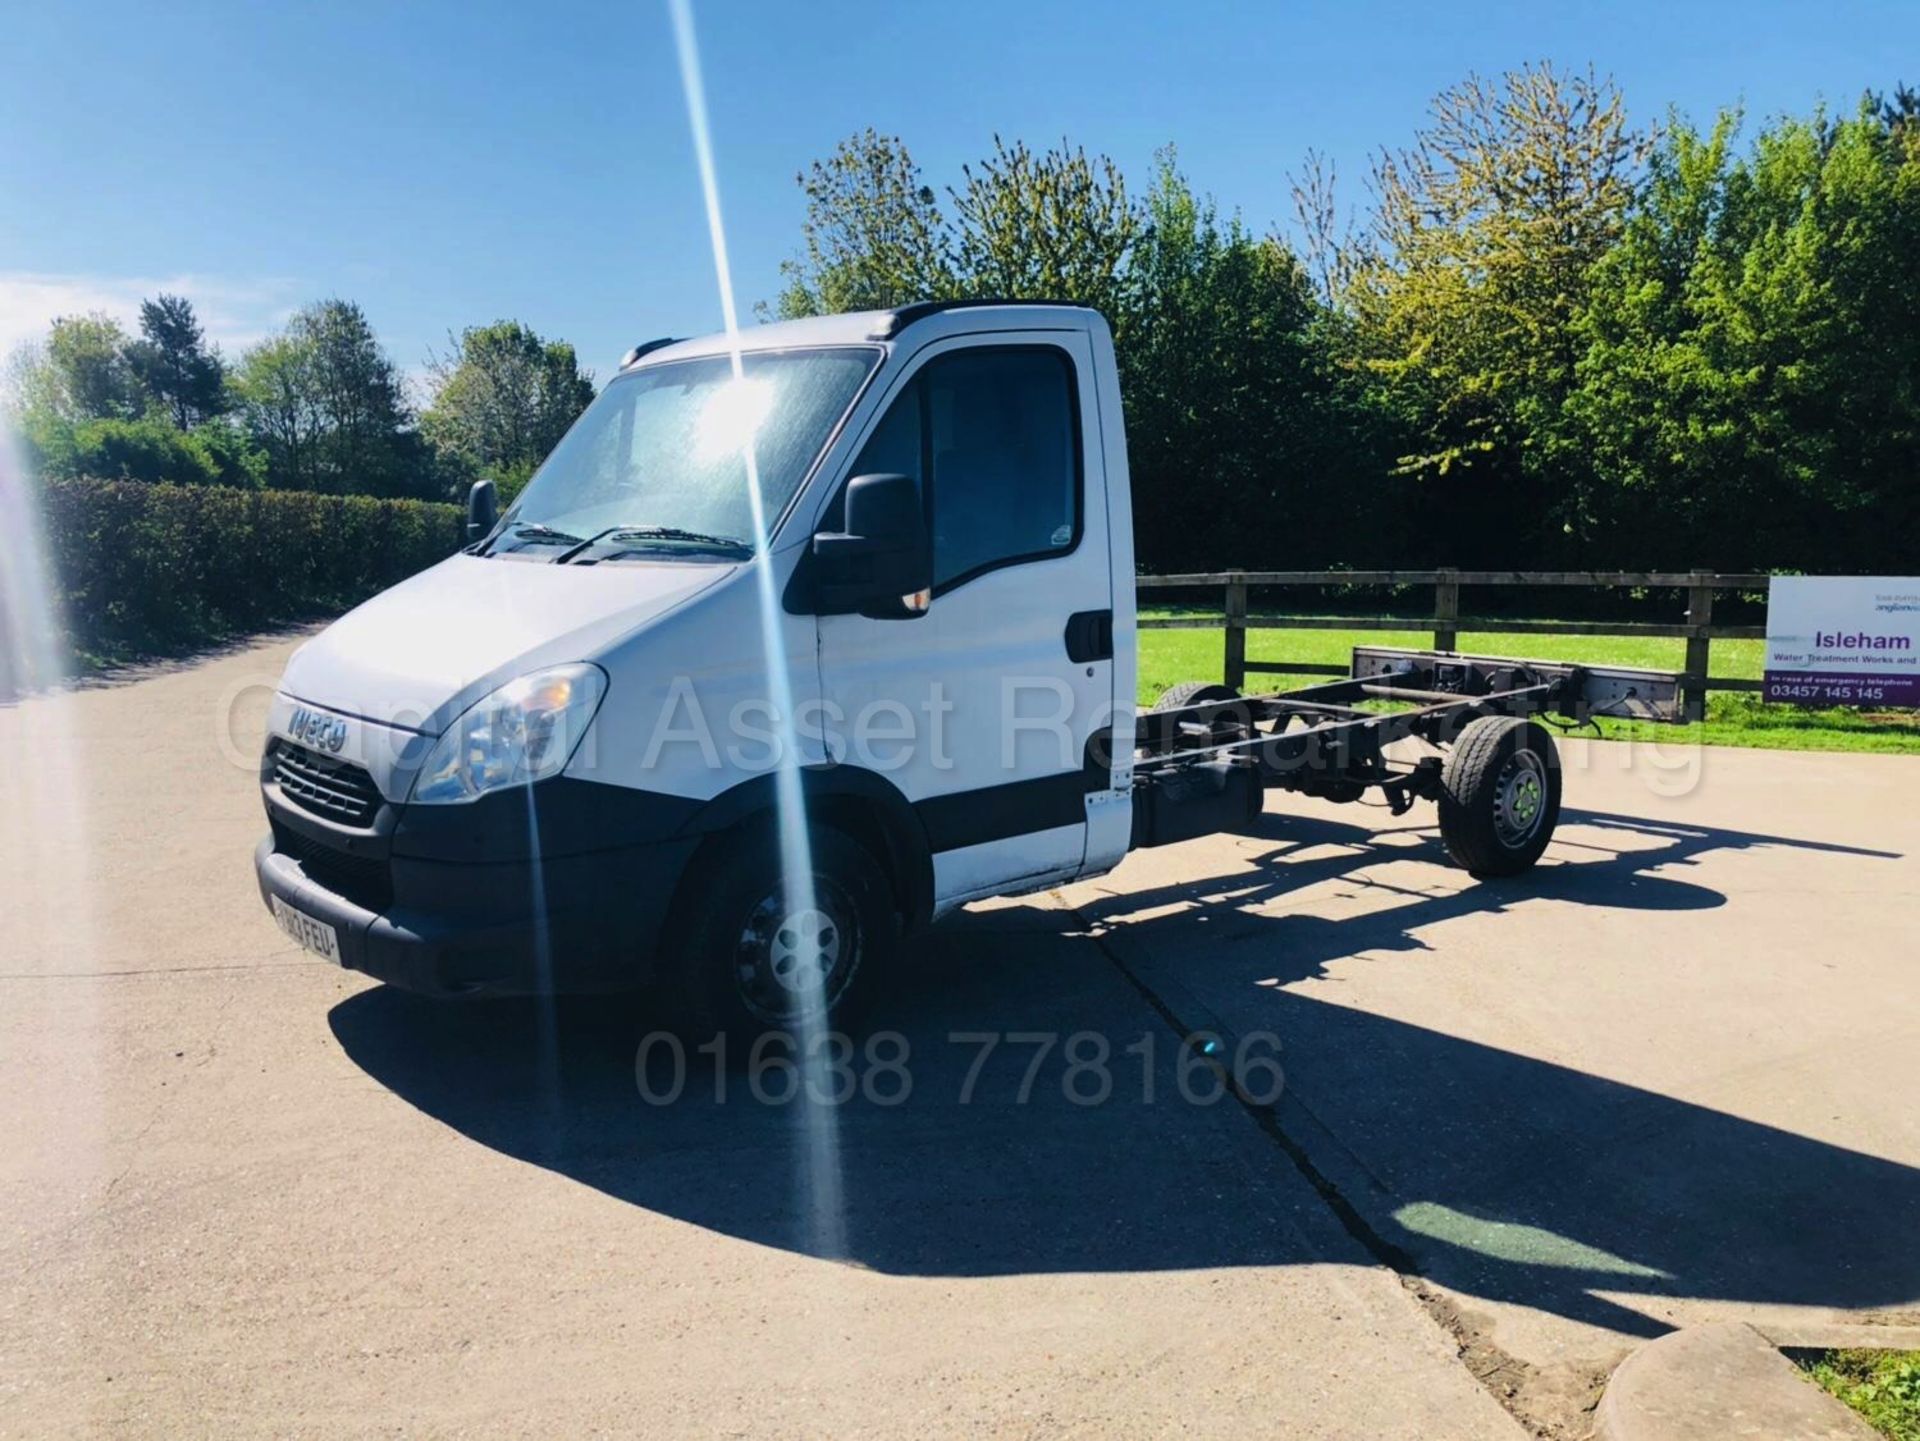 On Sale IVECO DAILY 35S11 'LWB - CHASSIS CAB' (2014 MODEL) '2.3 DIESEL - 6 SPEED' (1 OWNER) - Image 4 of 17